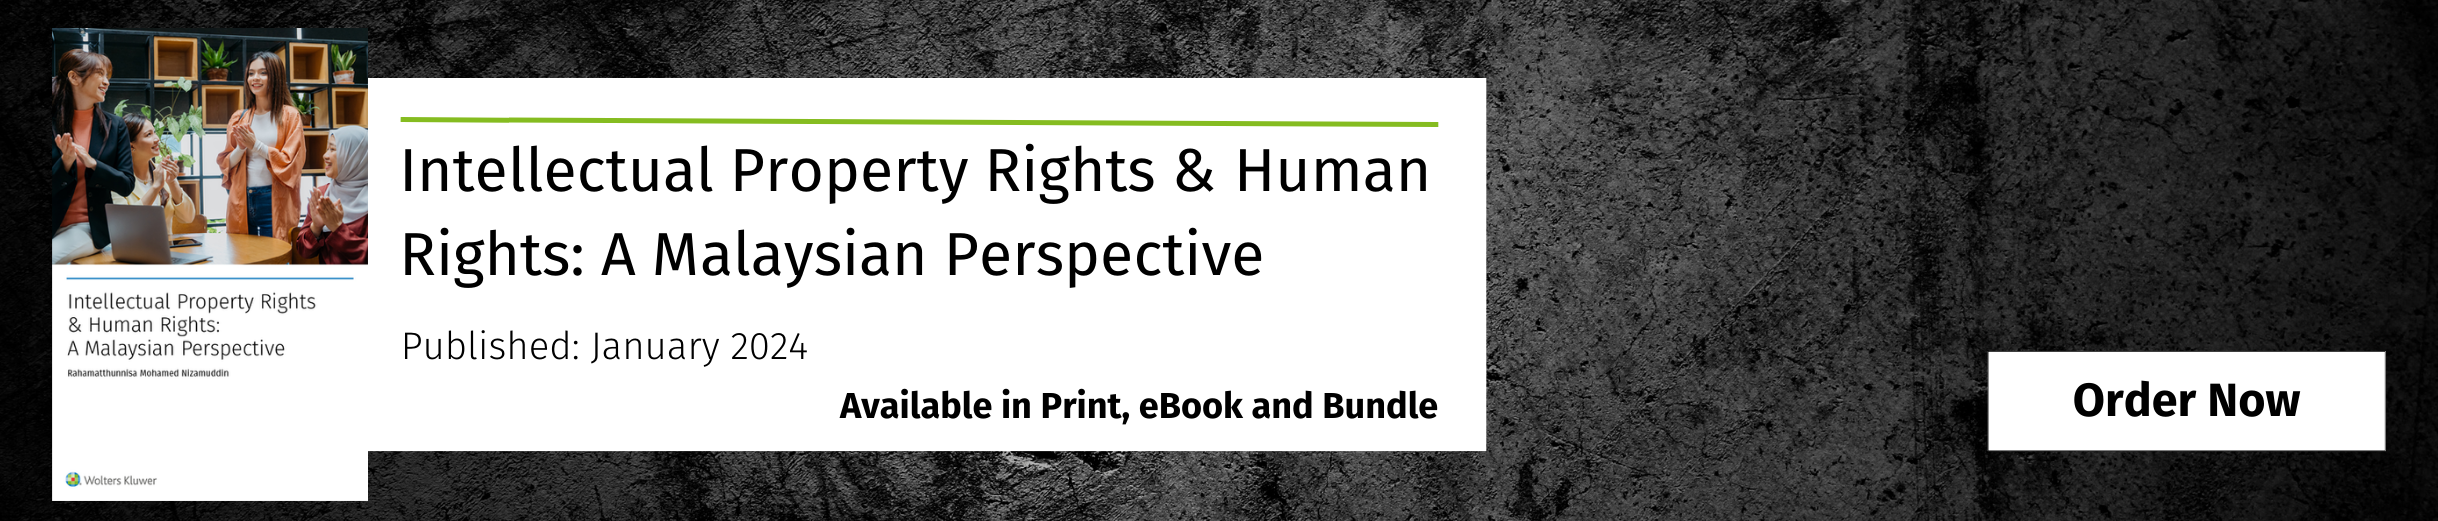 Intellectual Property Rights & Human Rights: A Malaysian Perspective